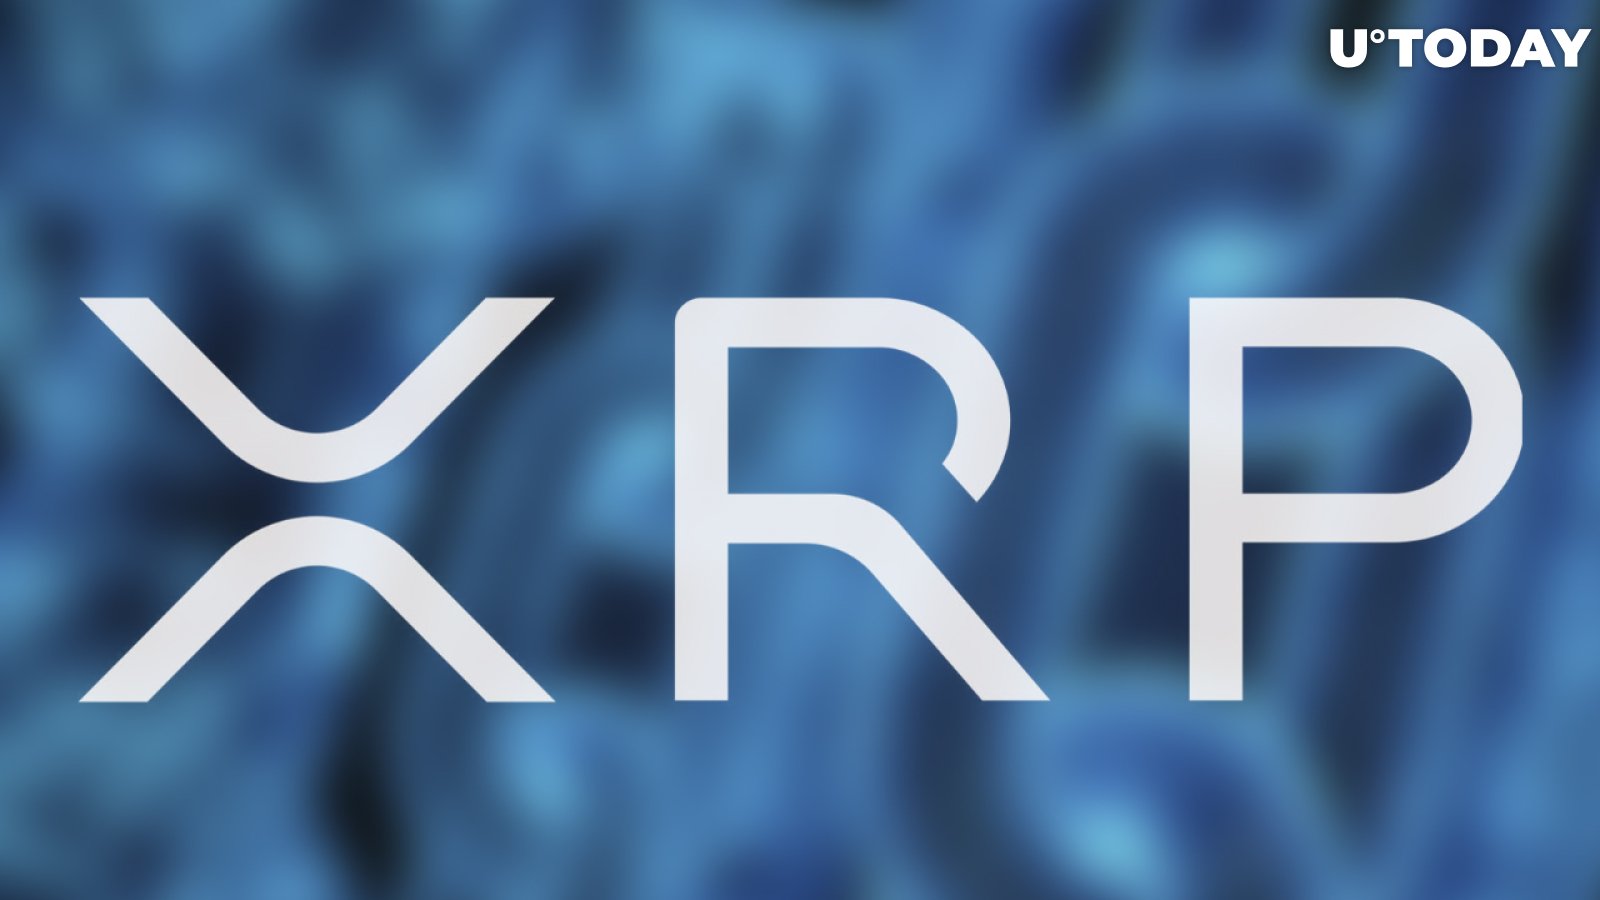 On-Chain Data Indicates XRP Price Is "Suppressed" and Has Room to Grow